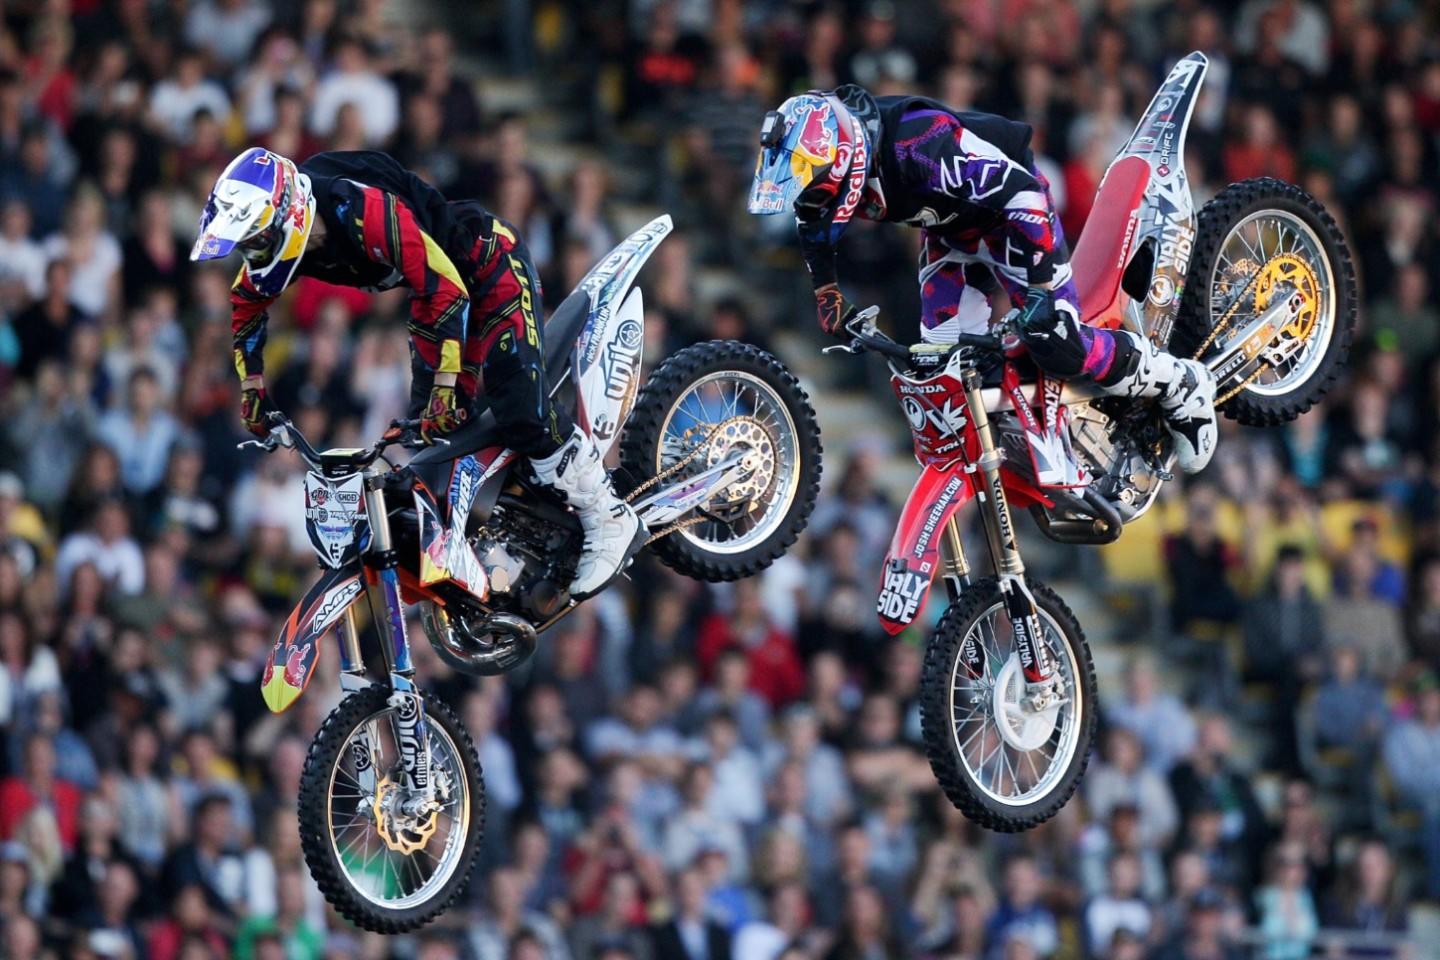 Nitro Circus Live Tickets | Buy or Sell Nitro Circus Live 2022 Tickets